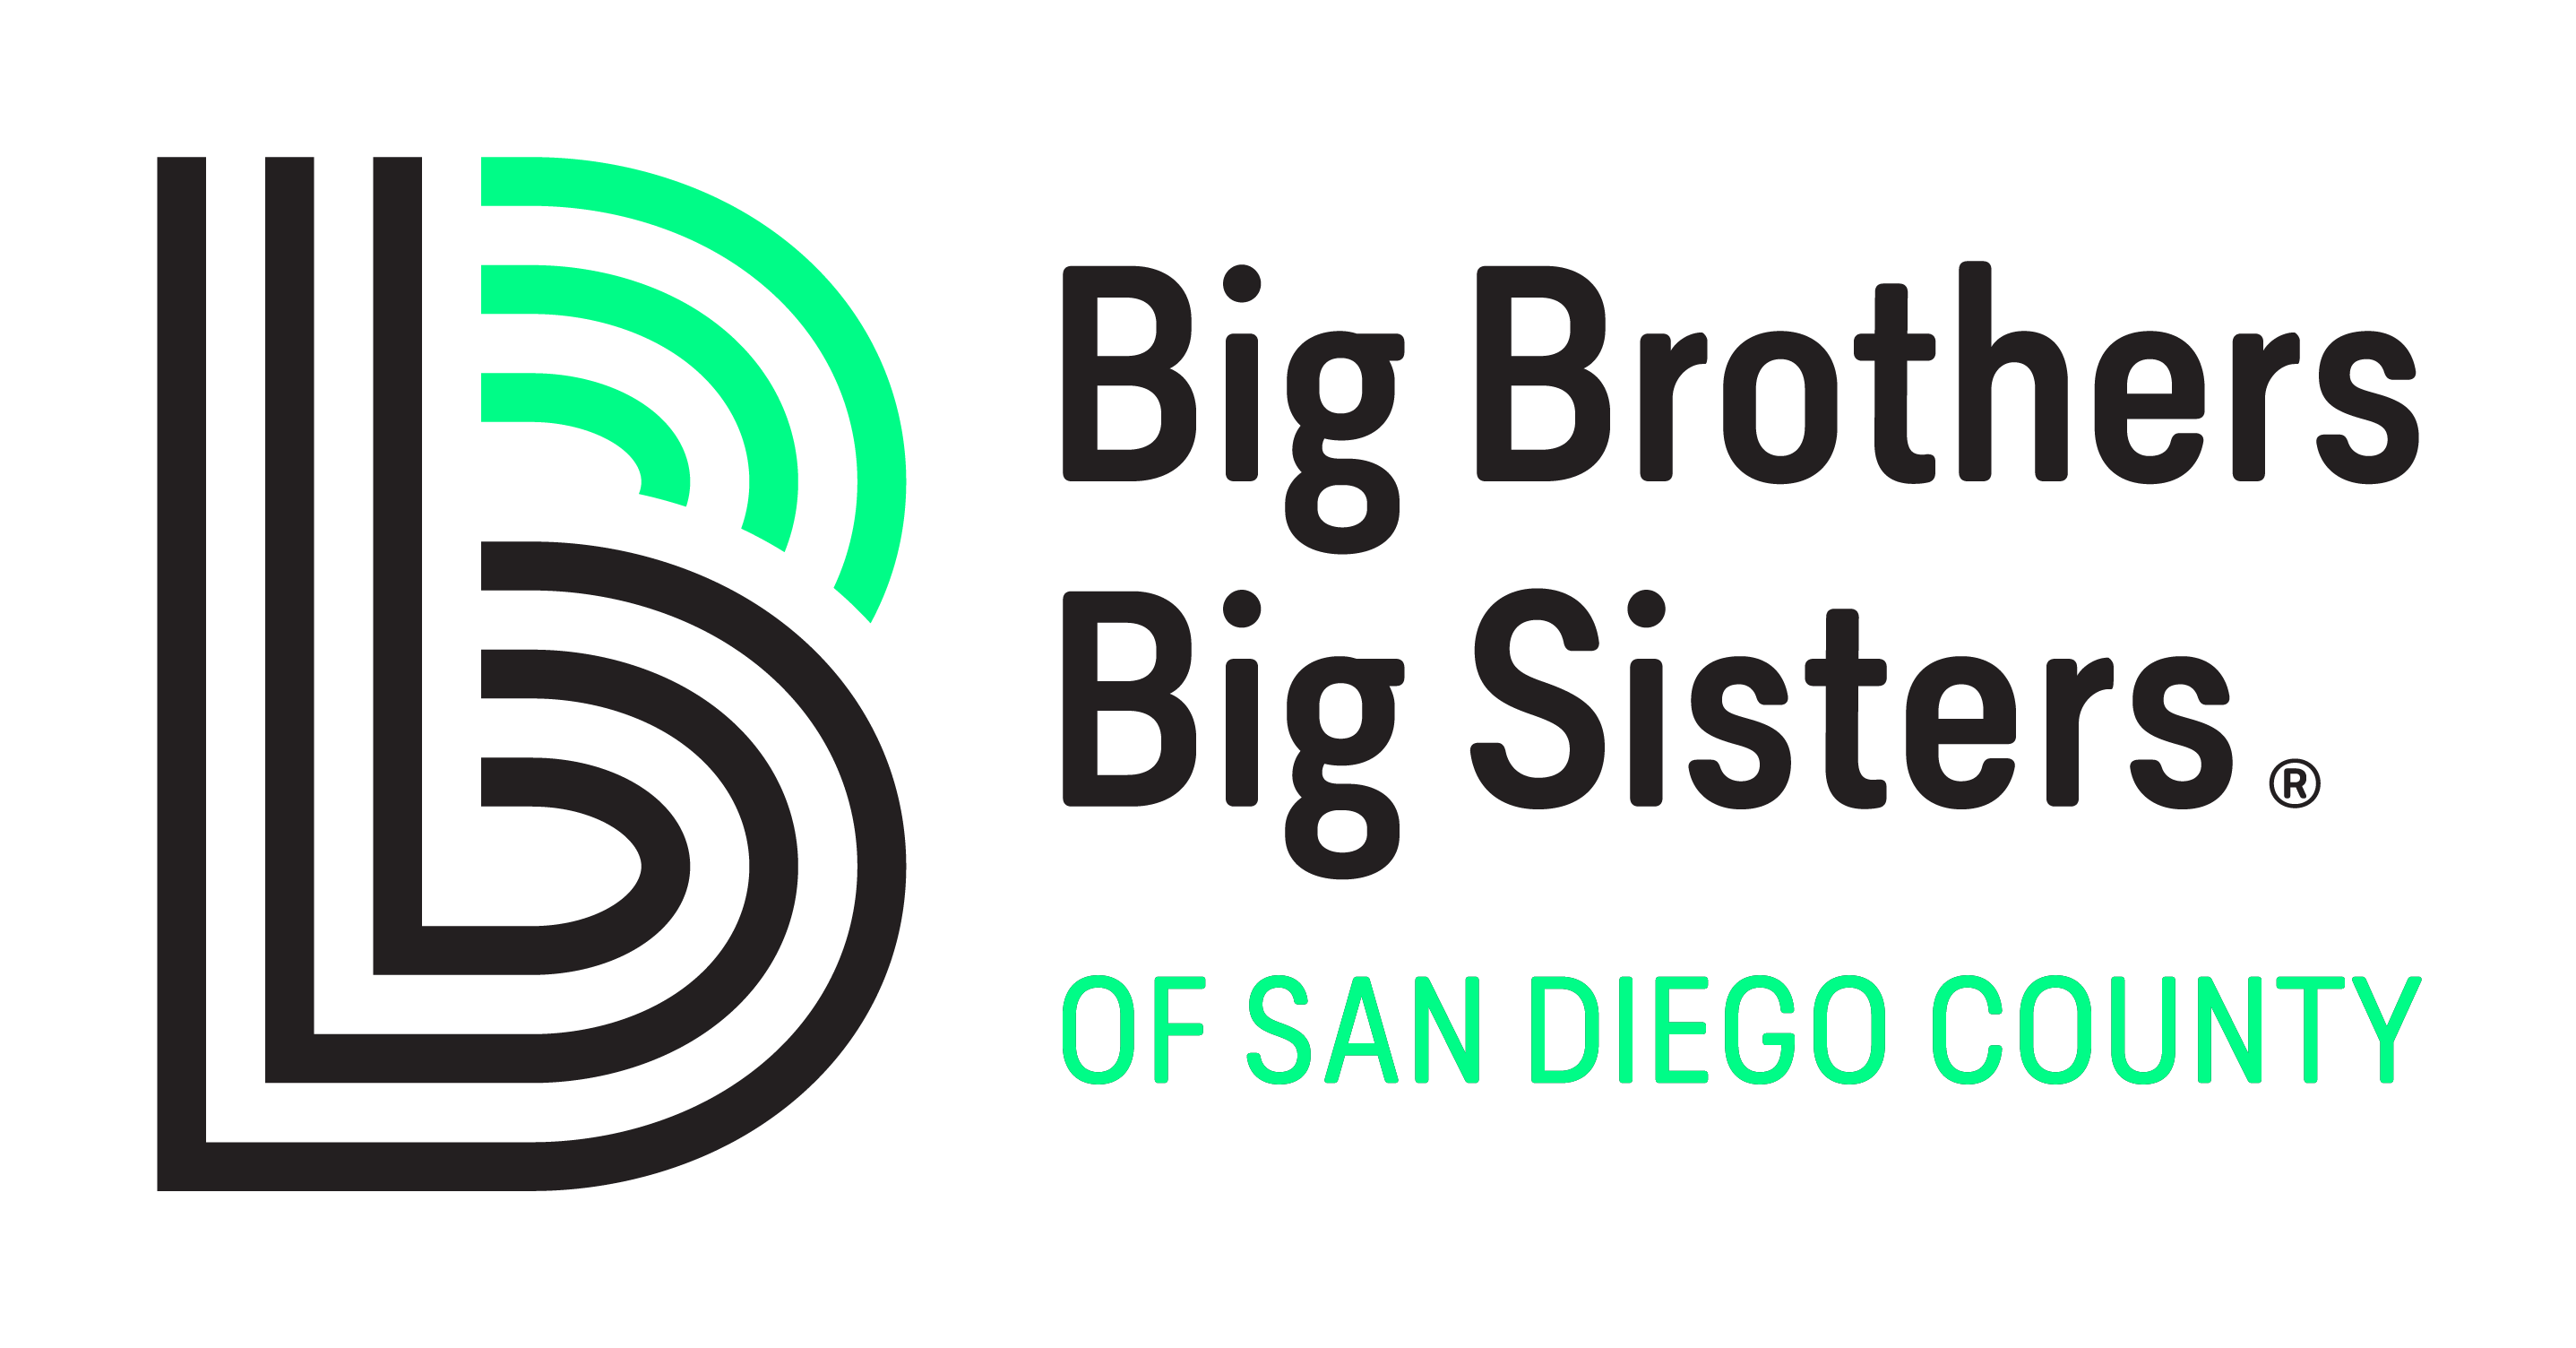 BBBS of San Diego County